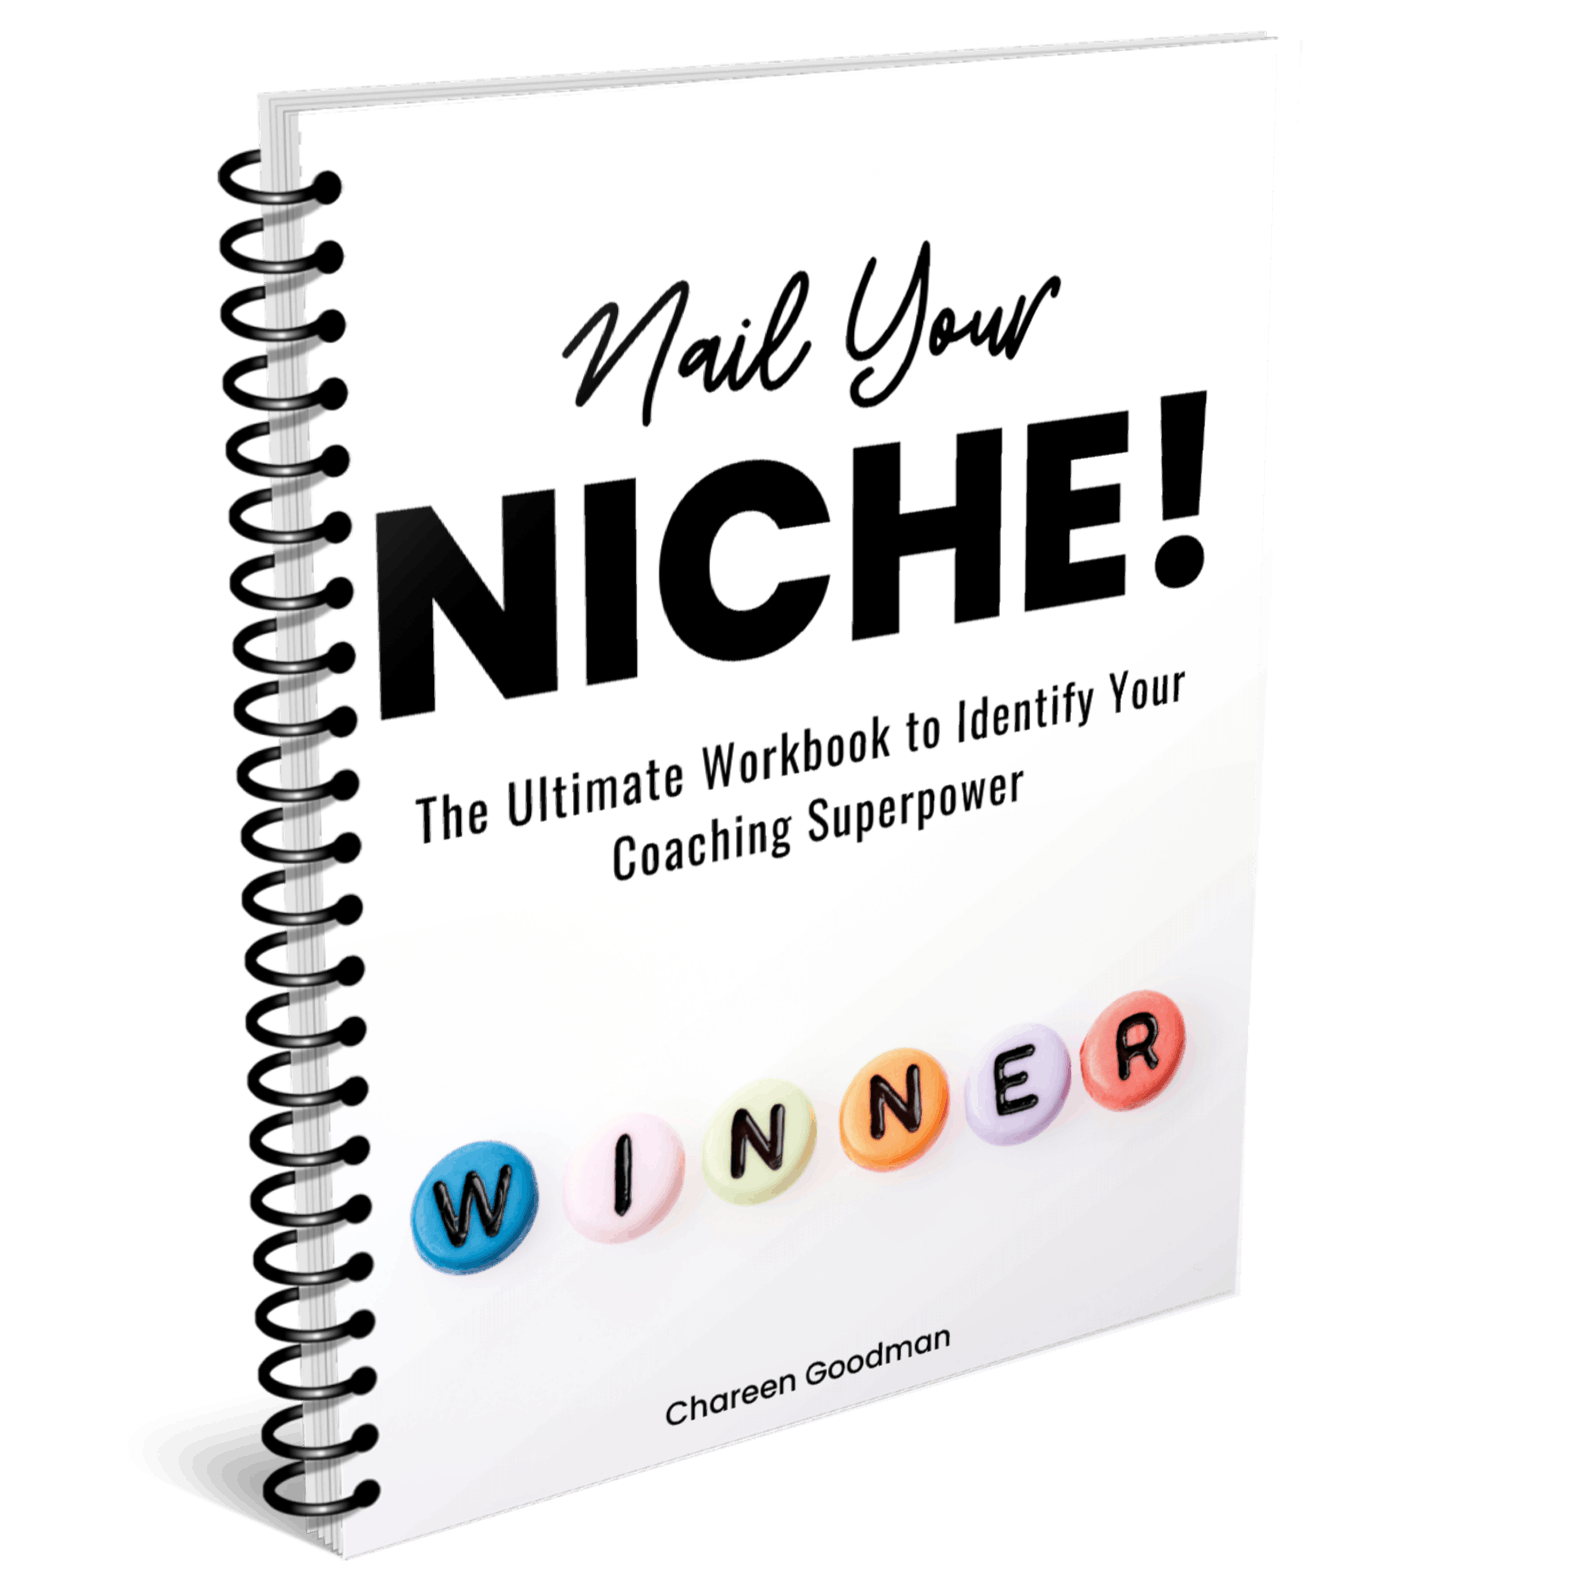 Nail Your Niche! The Ultimate Workbook to Identify Your Coaching Superpower